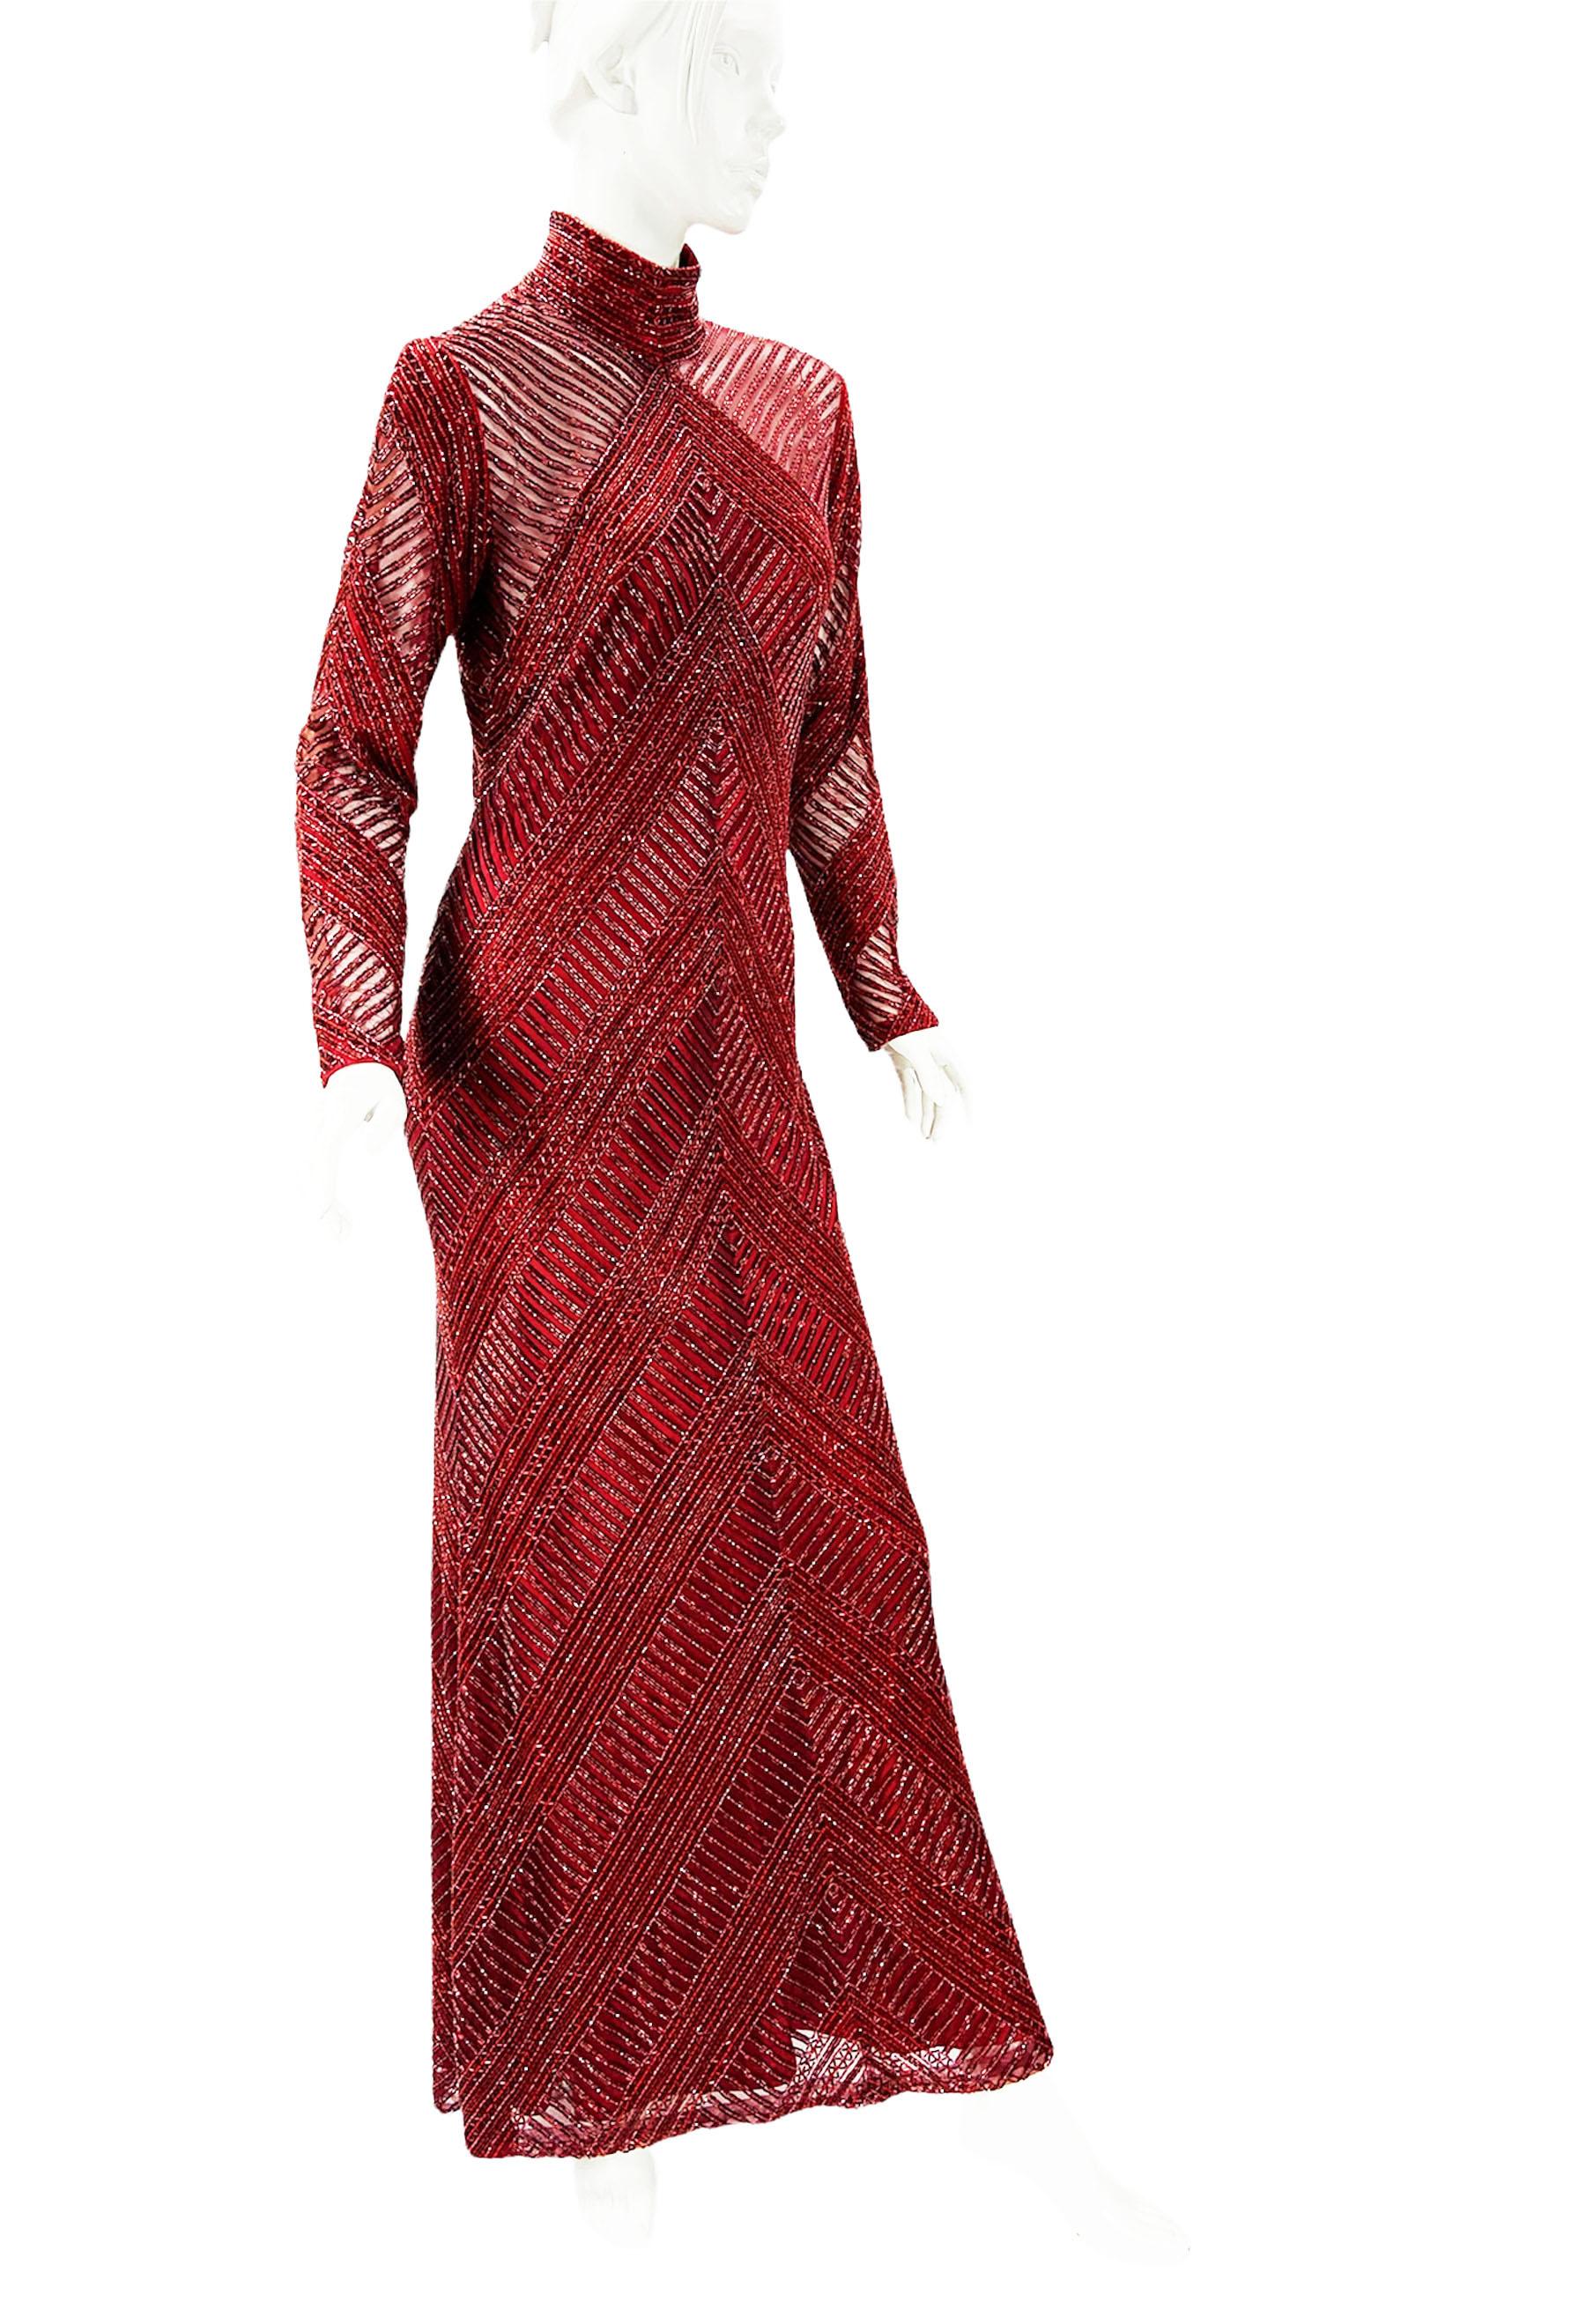 Vintage 80's Bob Mackie Fully Beaded Evening Dress Gown
Size Label Missing - Please check Measurements
Turtleneck evening dress fully beaded in burgundy and red glass beads over the net.
Fully lined in red satin, long sleeves end with the zippers.